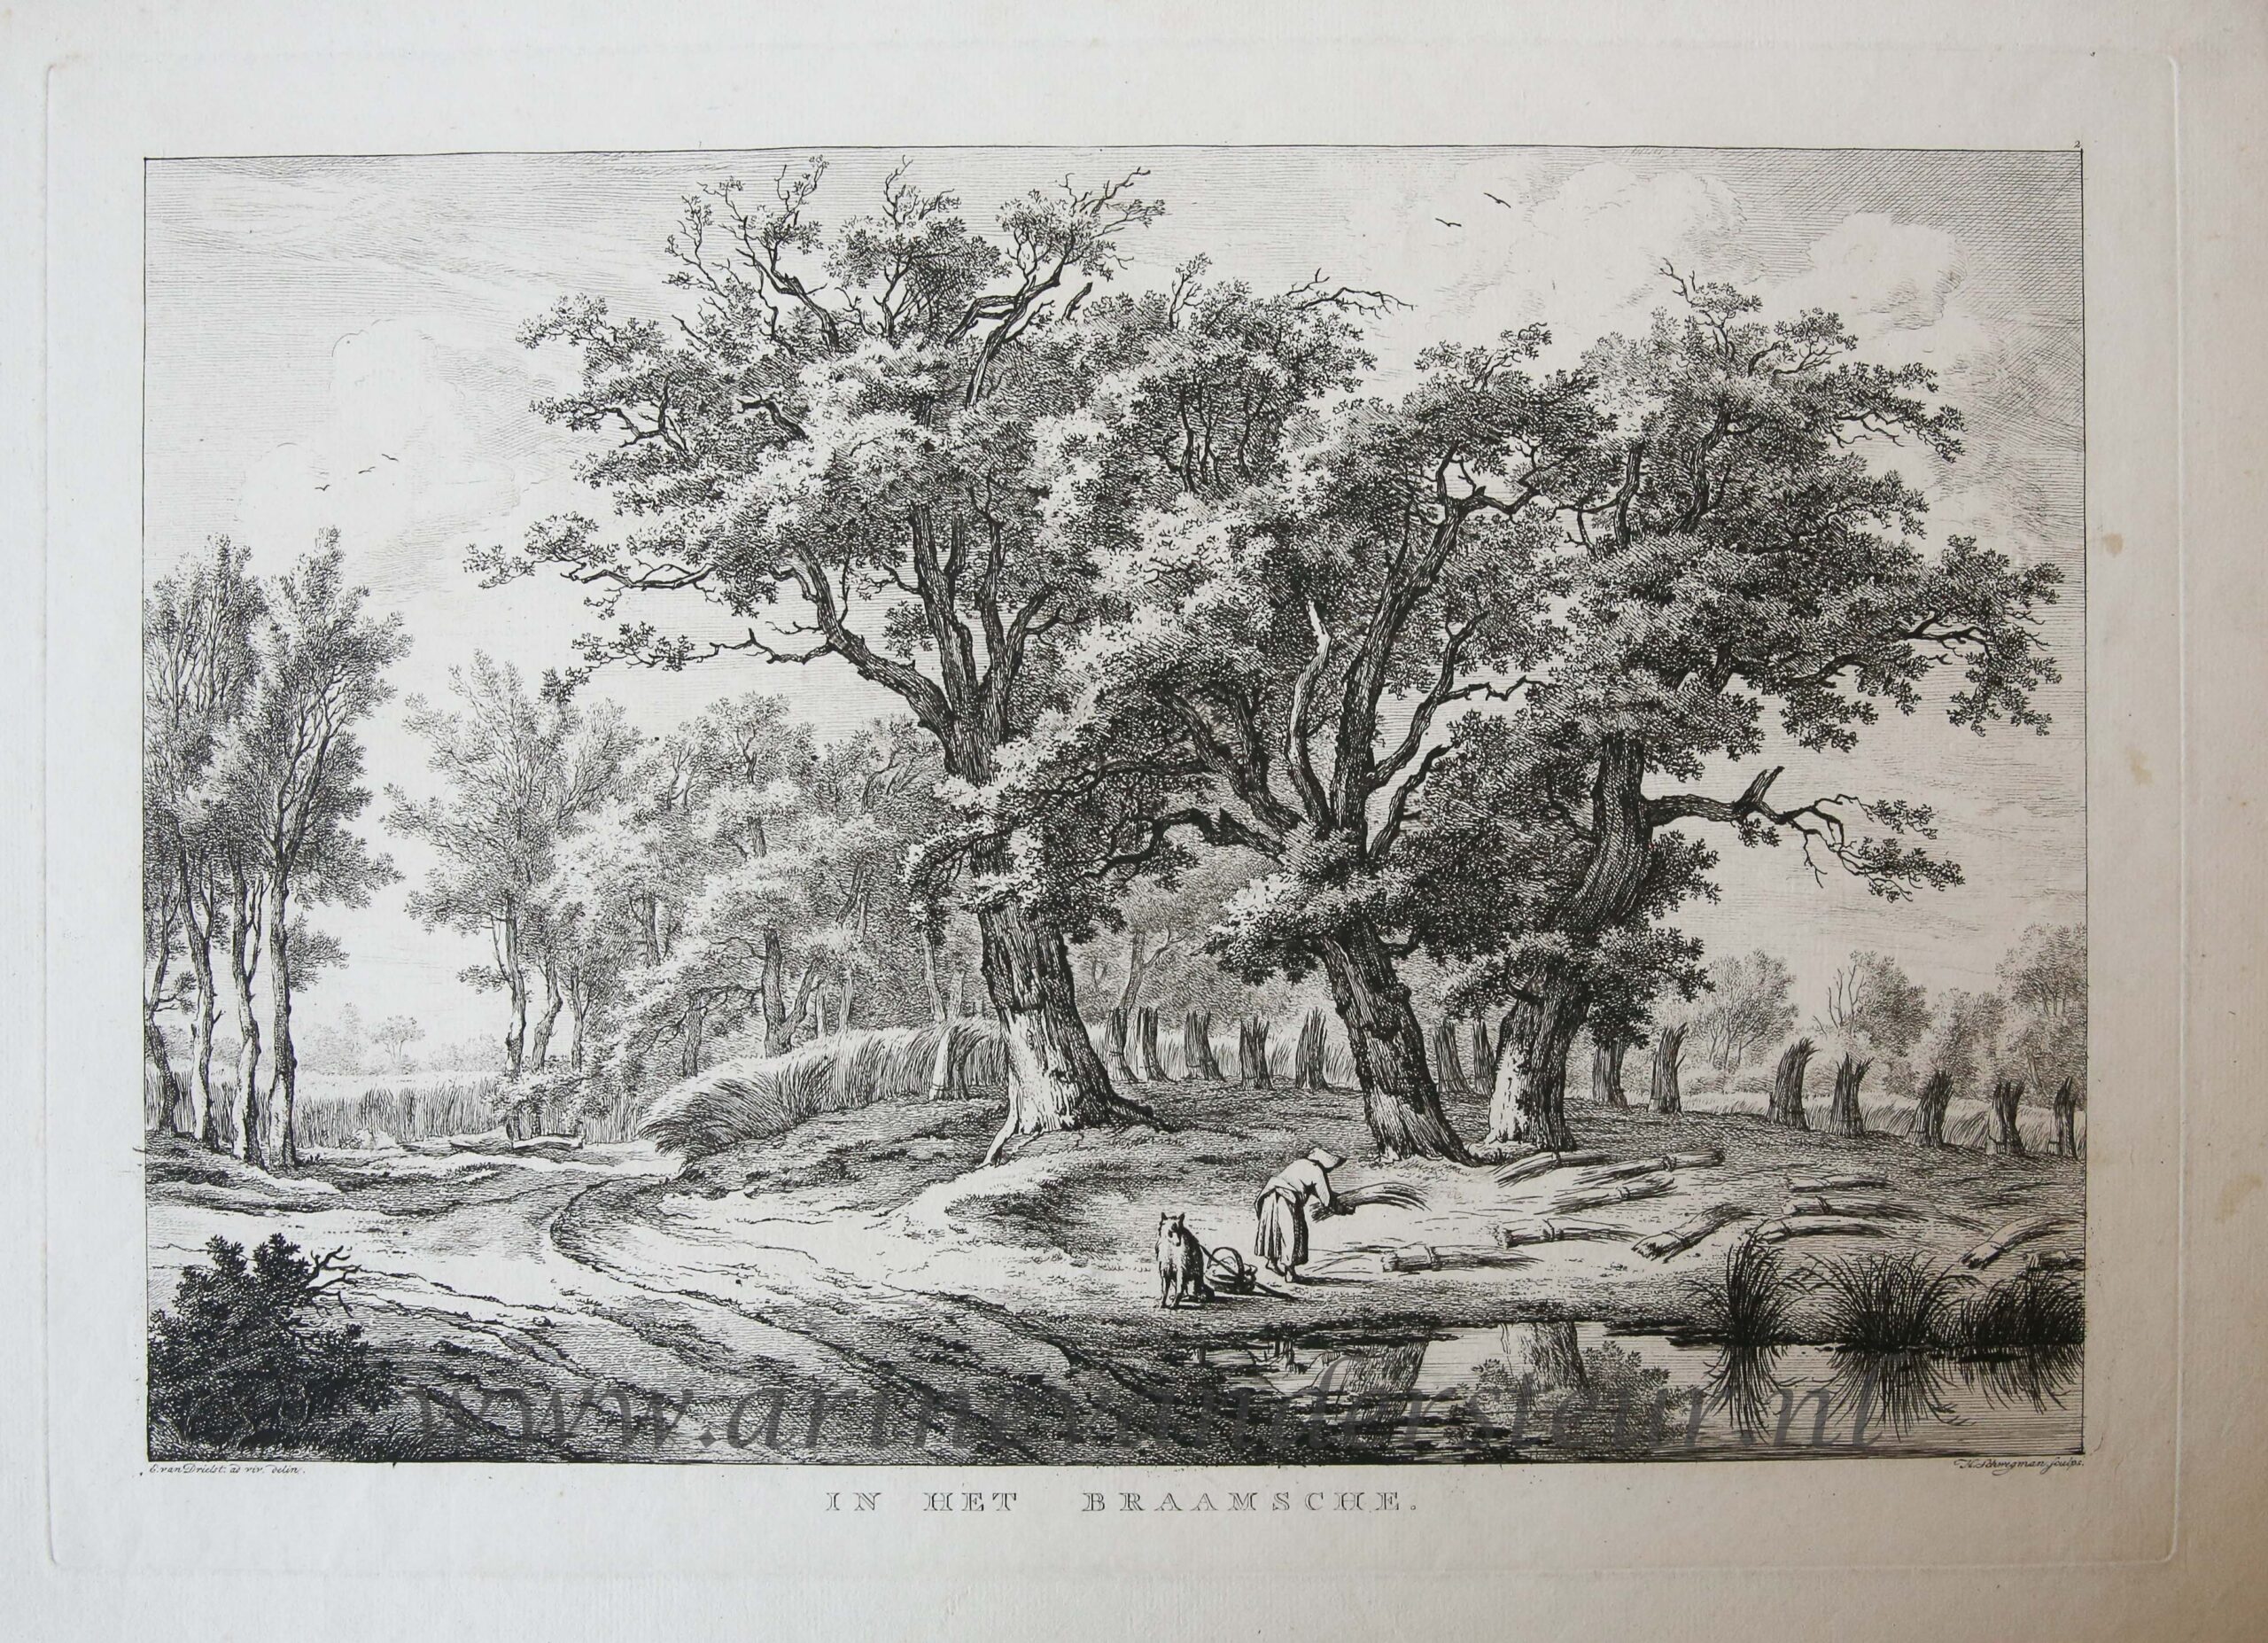 [Antique etching and engraving] E.v. Drielst, after H. Schwegman, IN HET DRAAMSCHE, published before 1800.